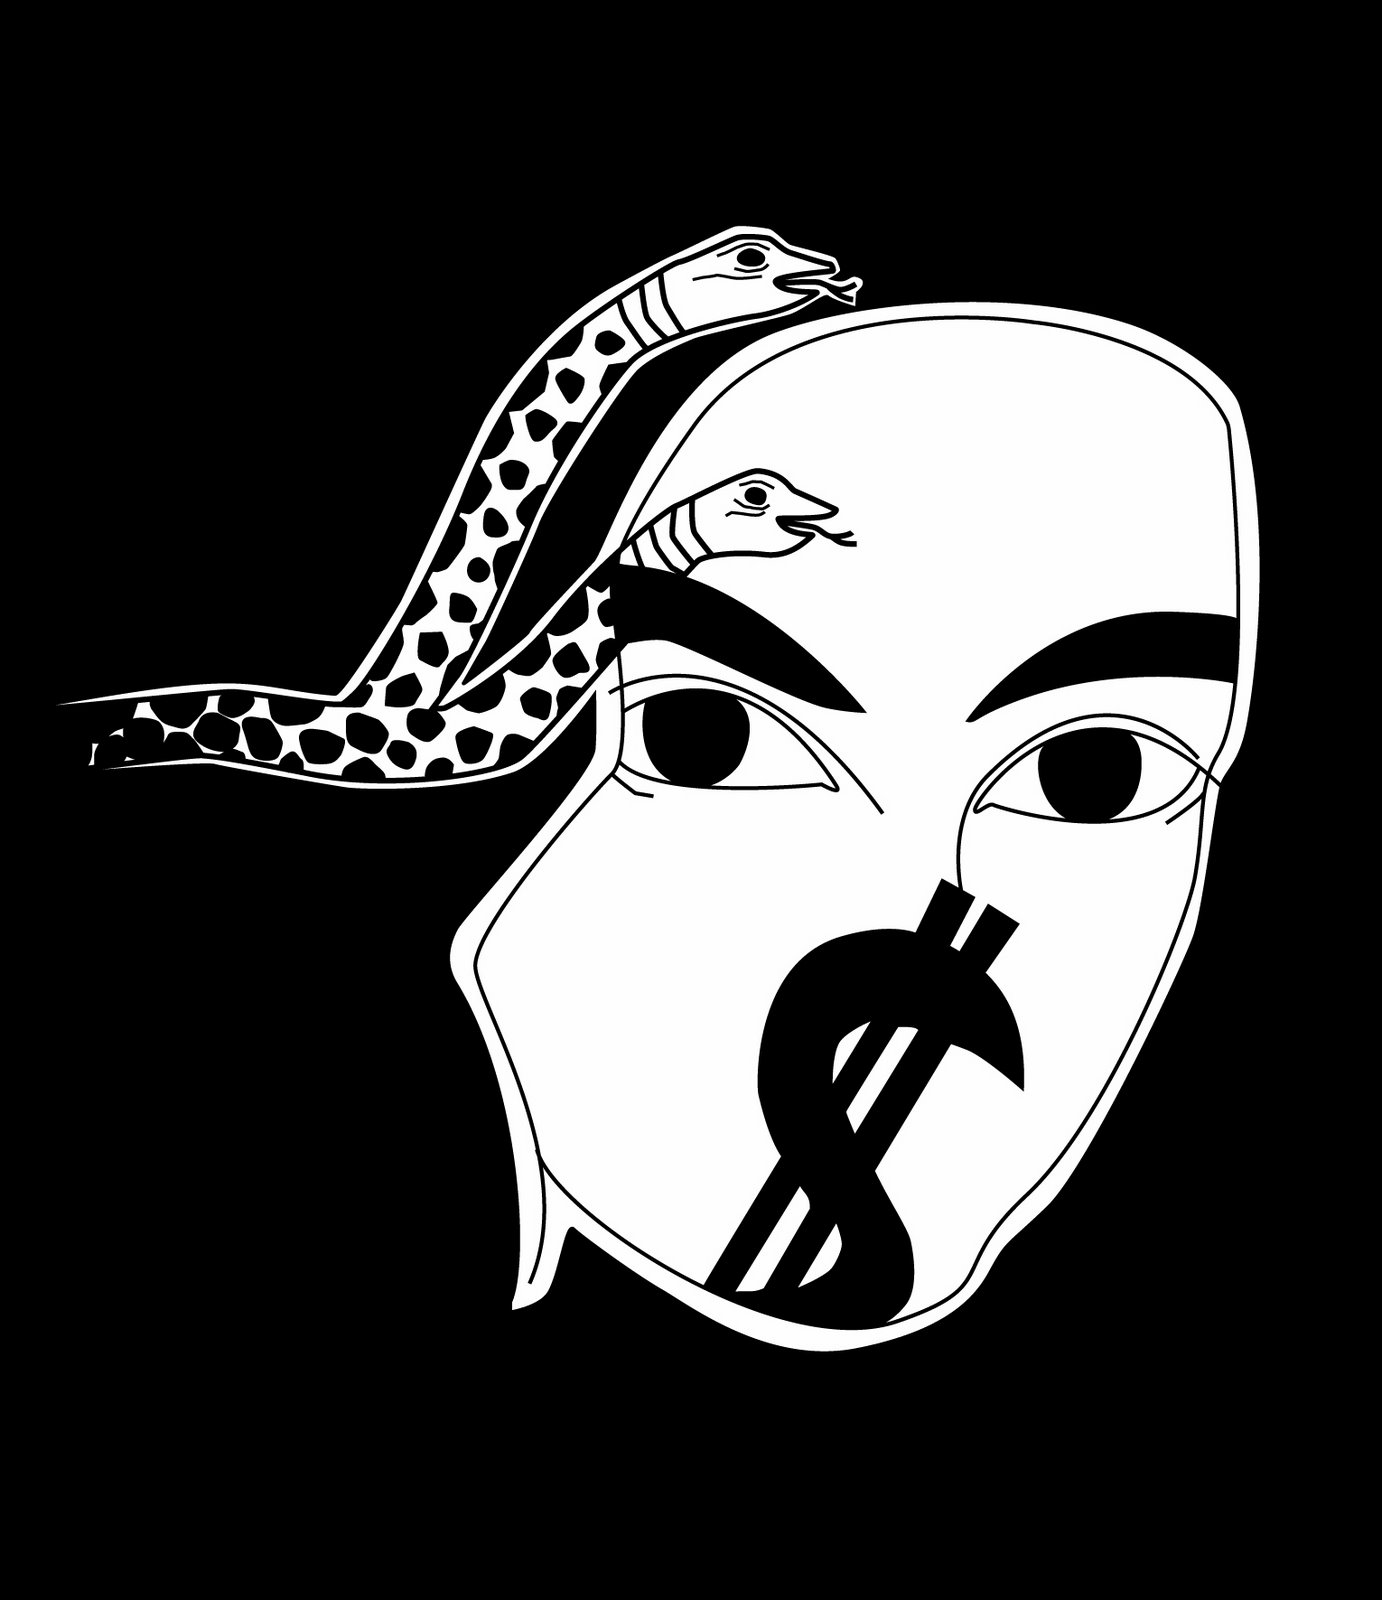 [Dollar+and+Snakes]